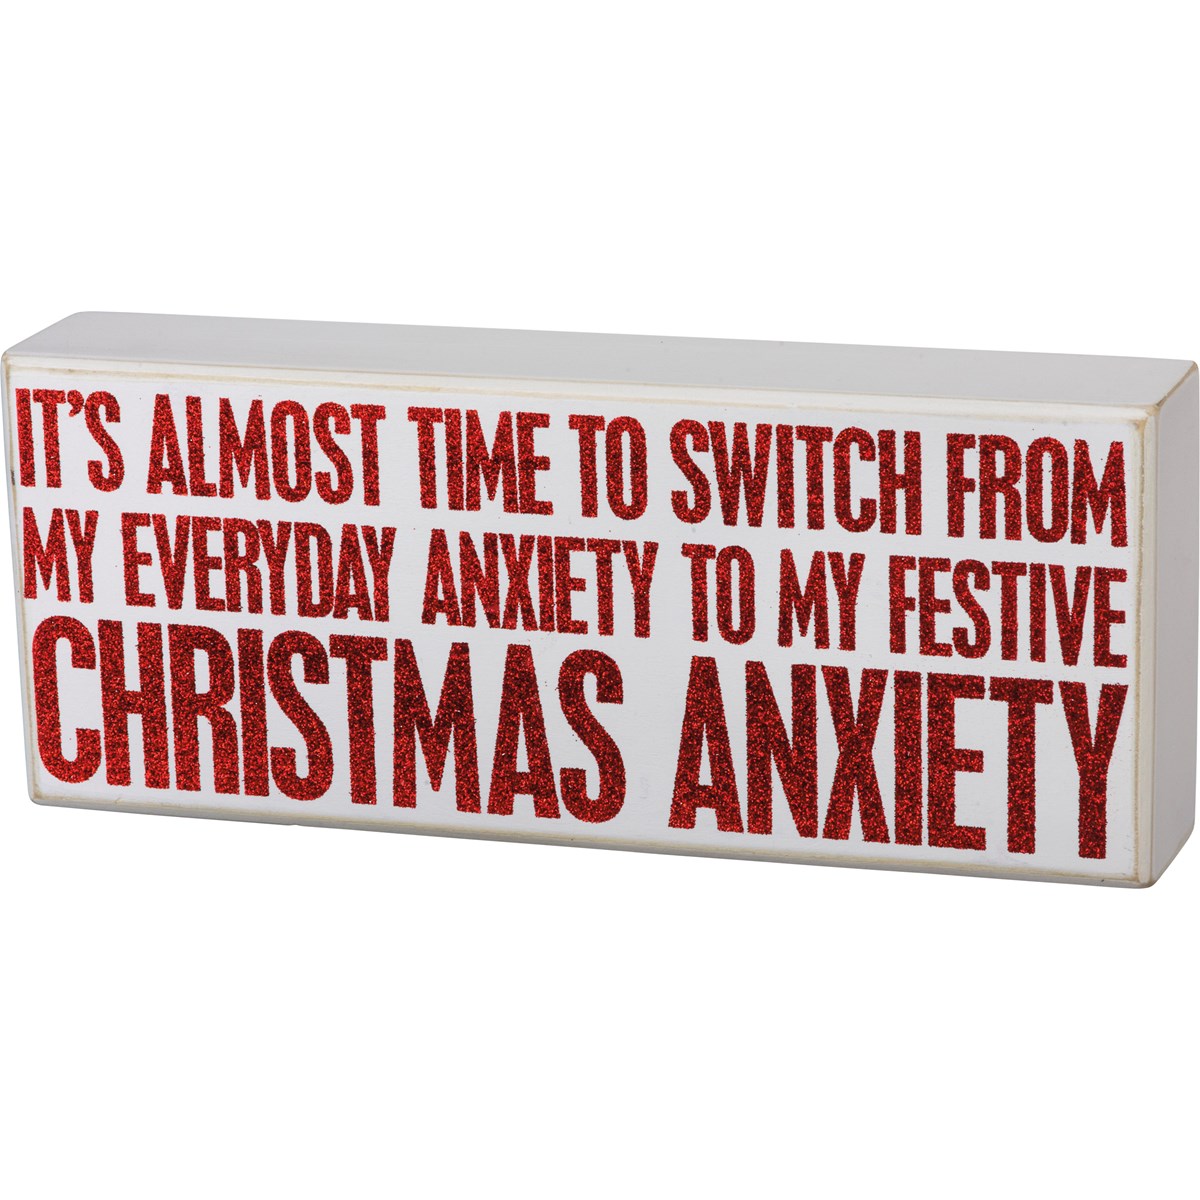 It's Almost Time Christmas Anxiety Box Sign - Wood, Glitter